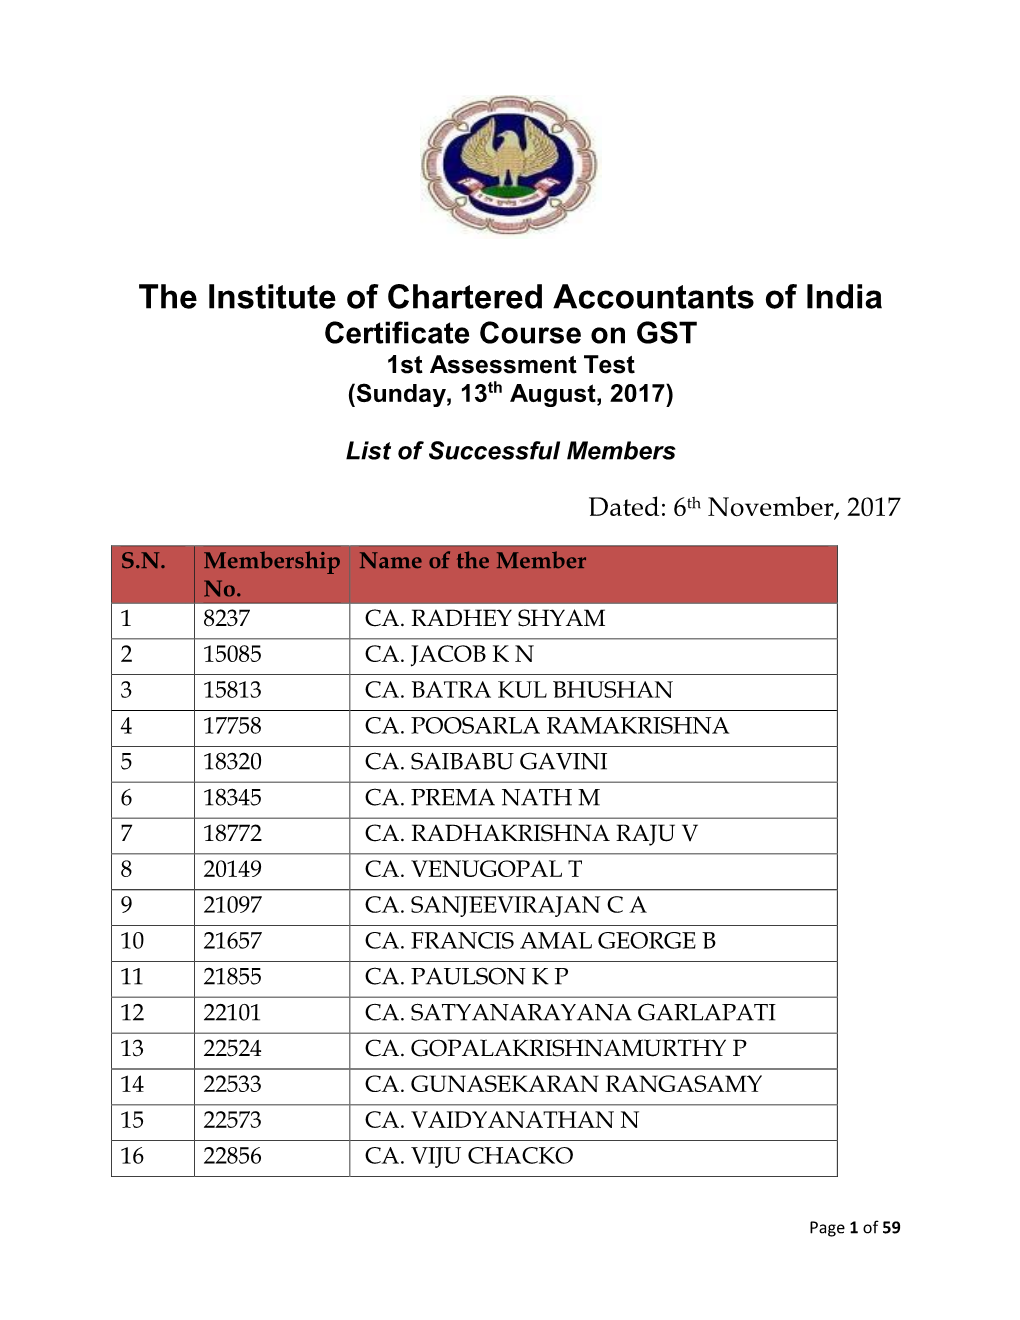 The Institute of Chartered Accountants of India Certificate Course on GST 1St Assessment Test (Sunday, 13Th August, 2017)